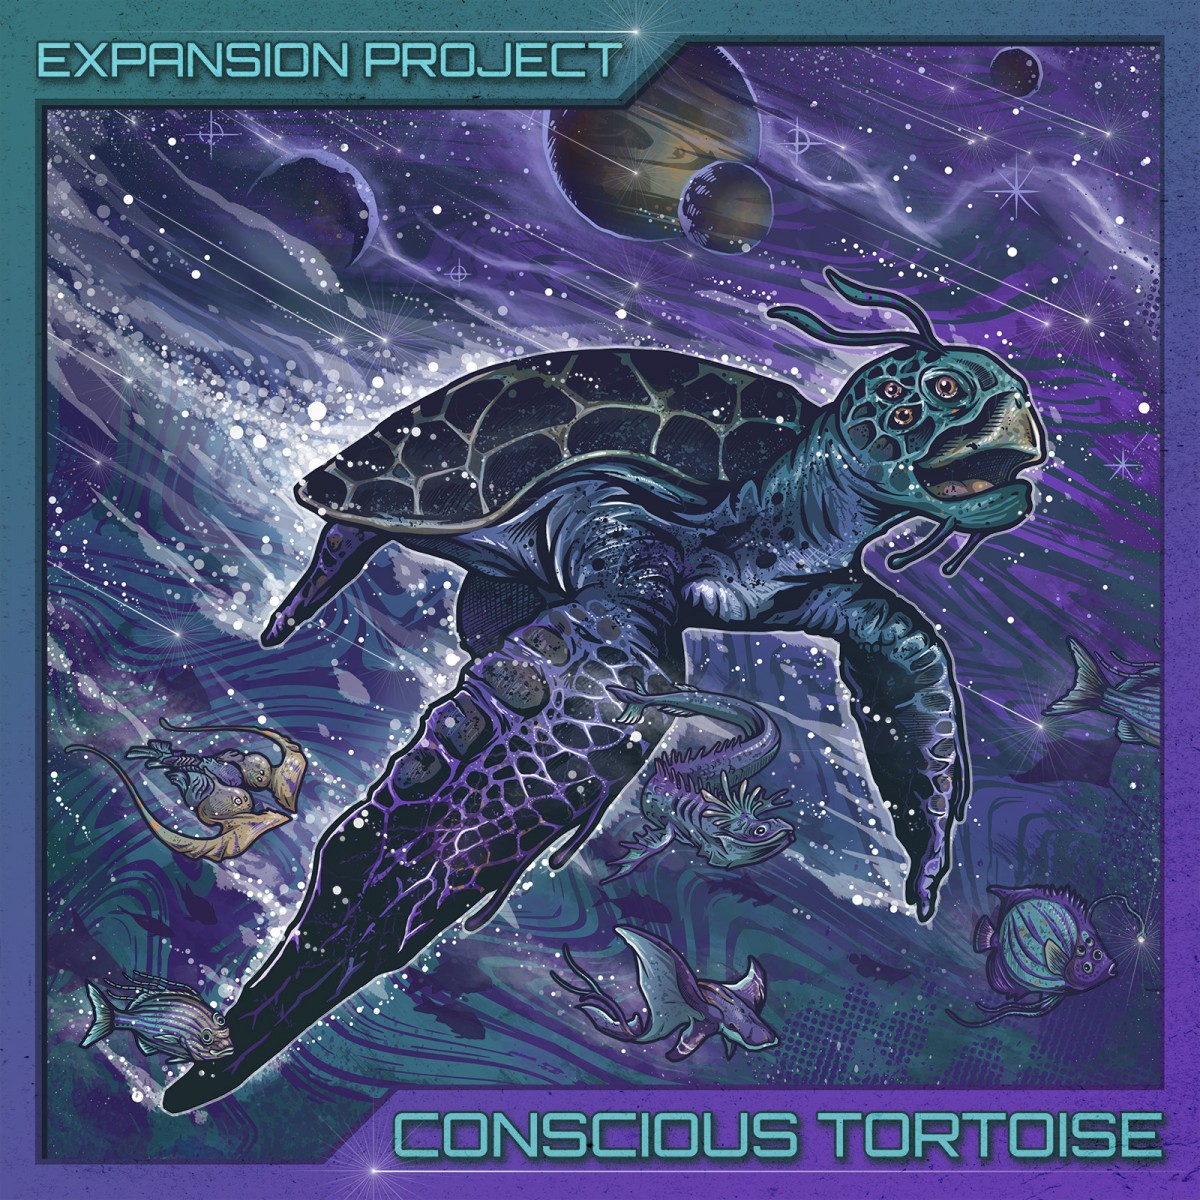 Interview with Emerging Artist – Expansion Project – New Album Debut, Free Halloween Party Oct 27 & more